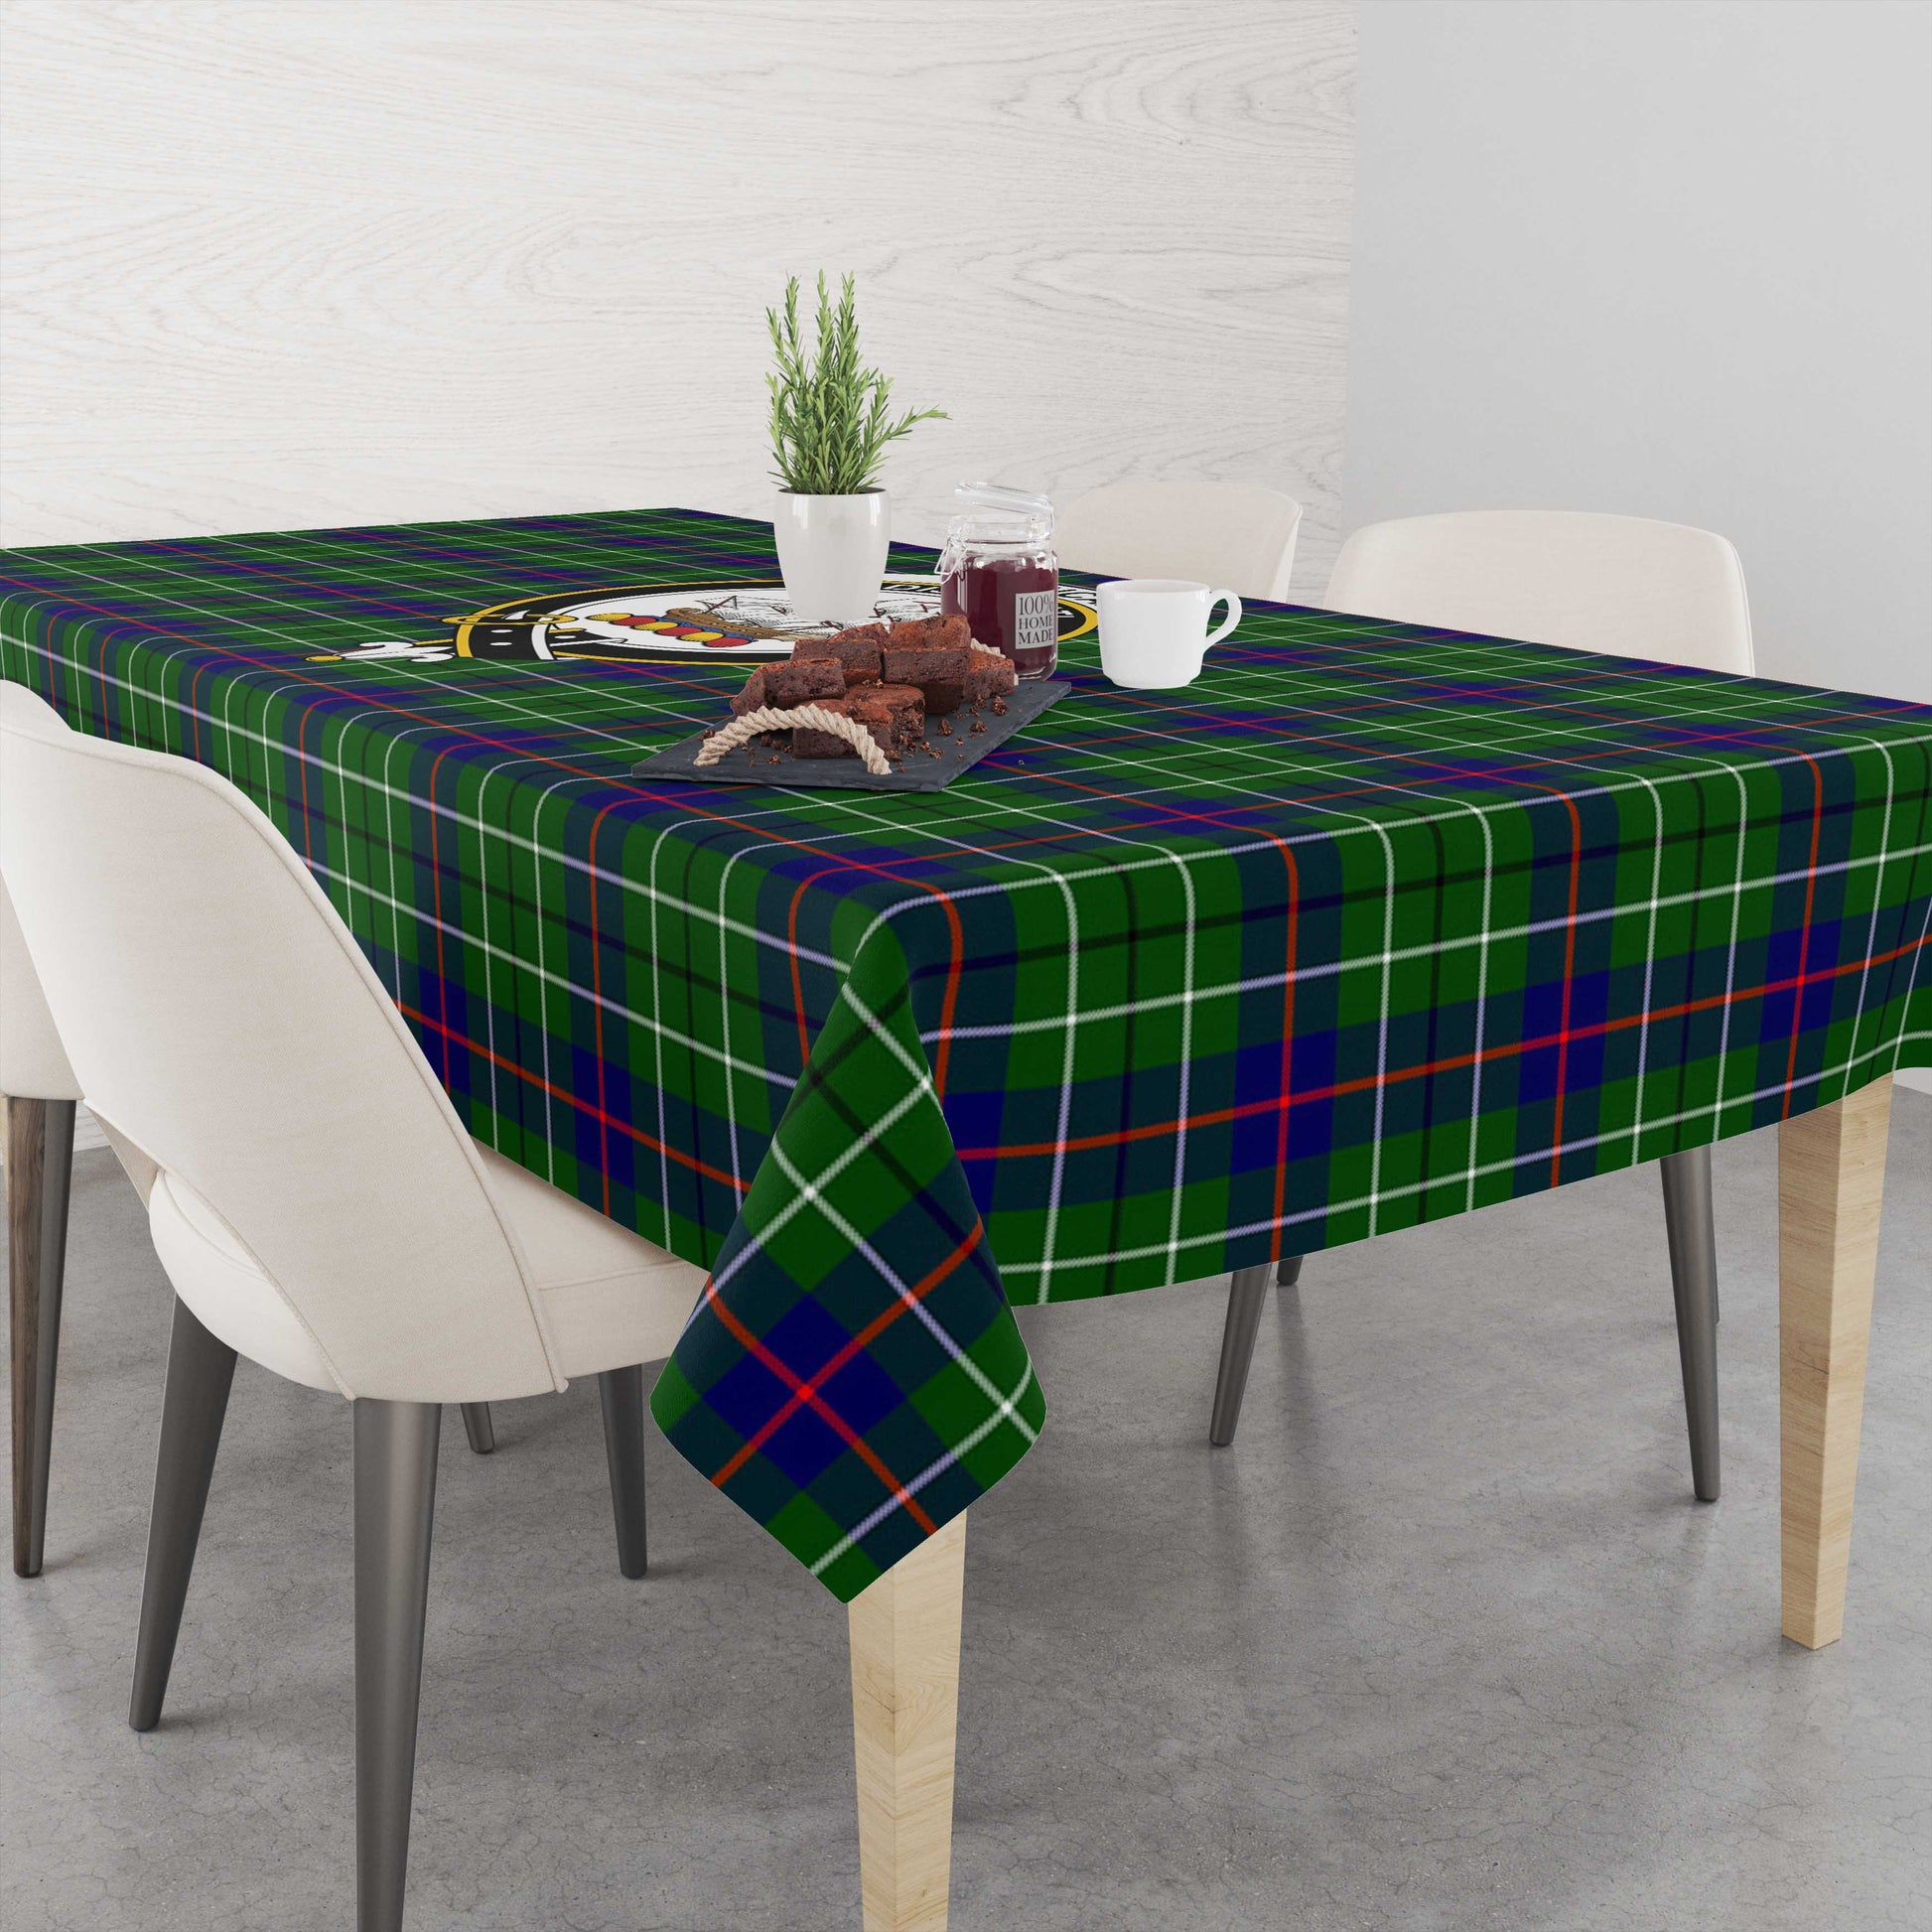 duncan-modern-tatan-tablecloth-with-family-crest